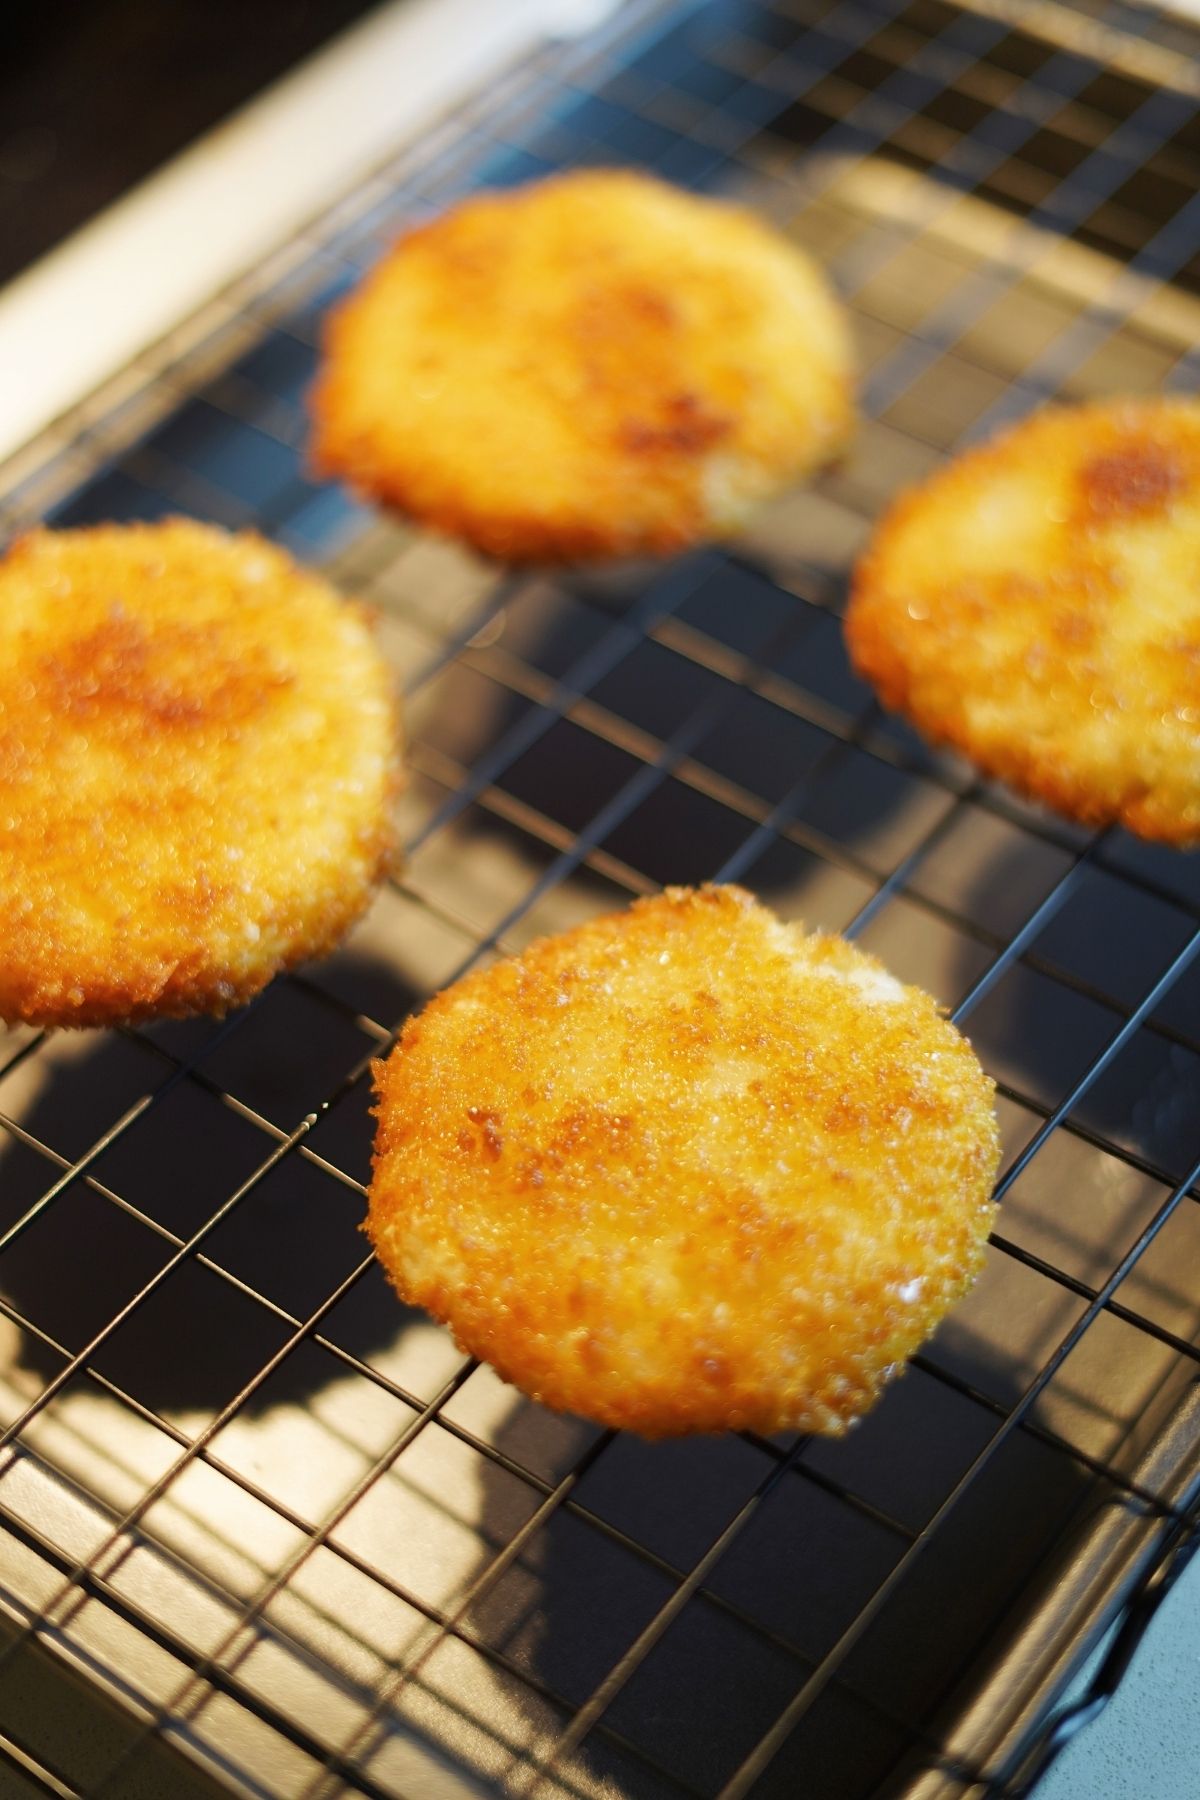 Fried rice patty disks on drying rack